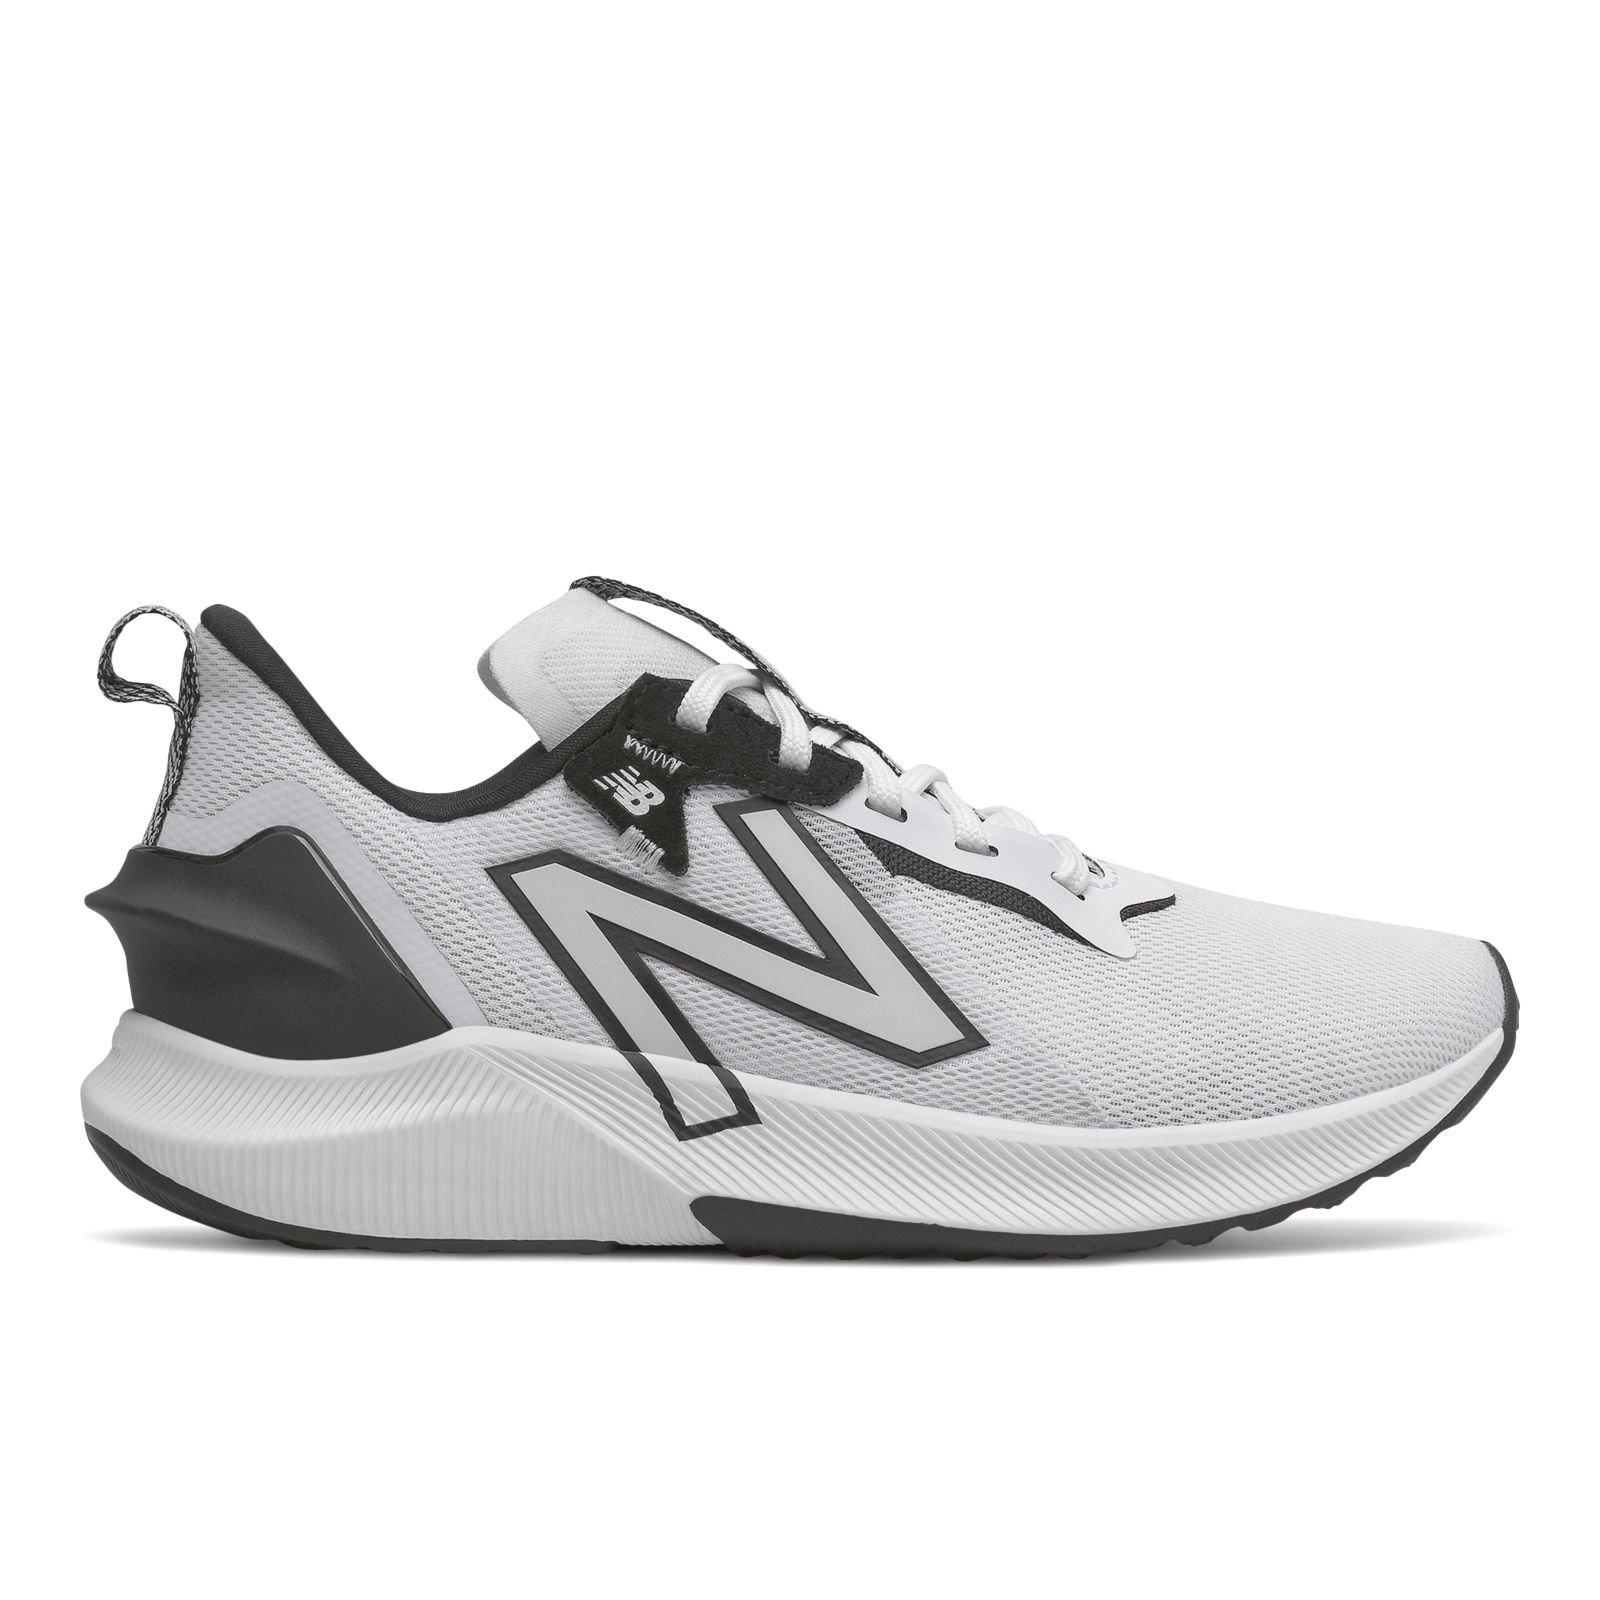 FuelCell RMX - Joe's New Balance Outlet